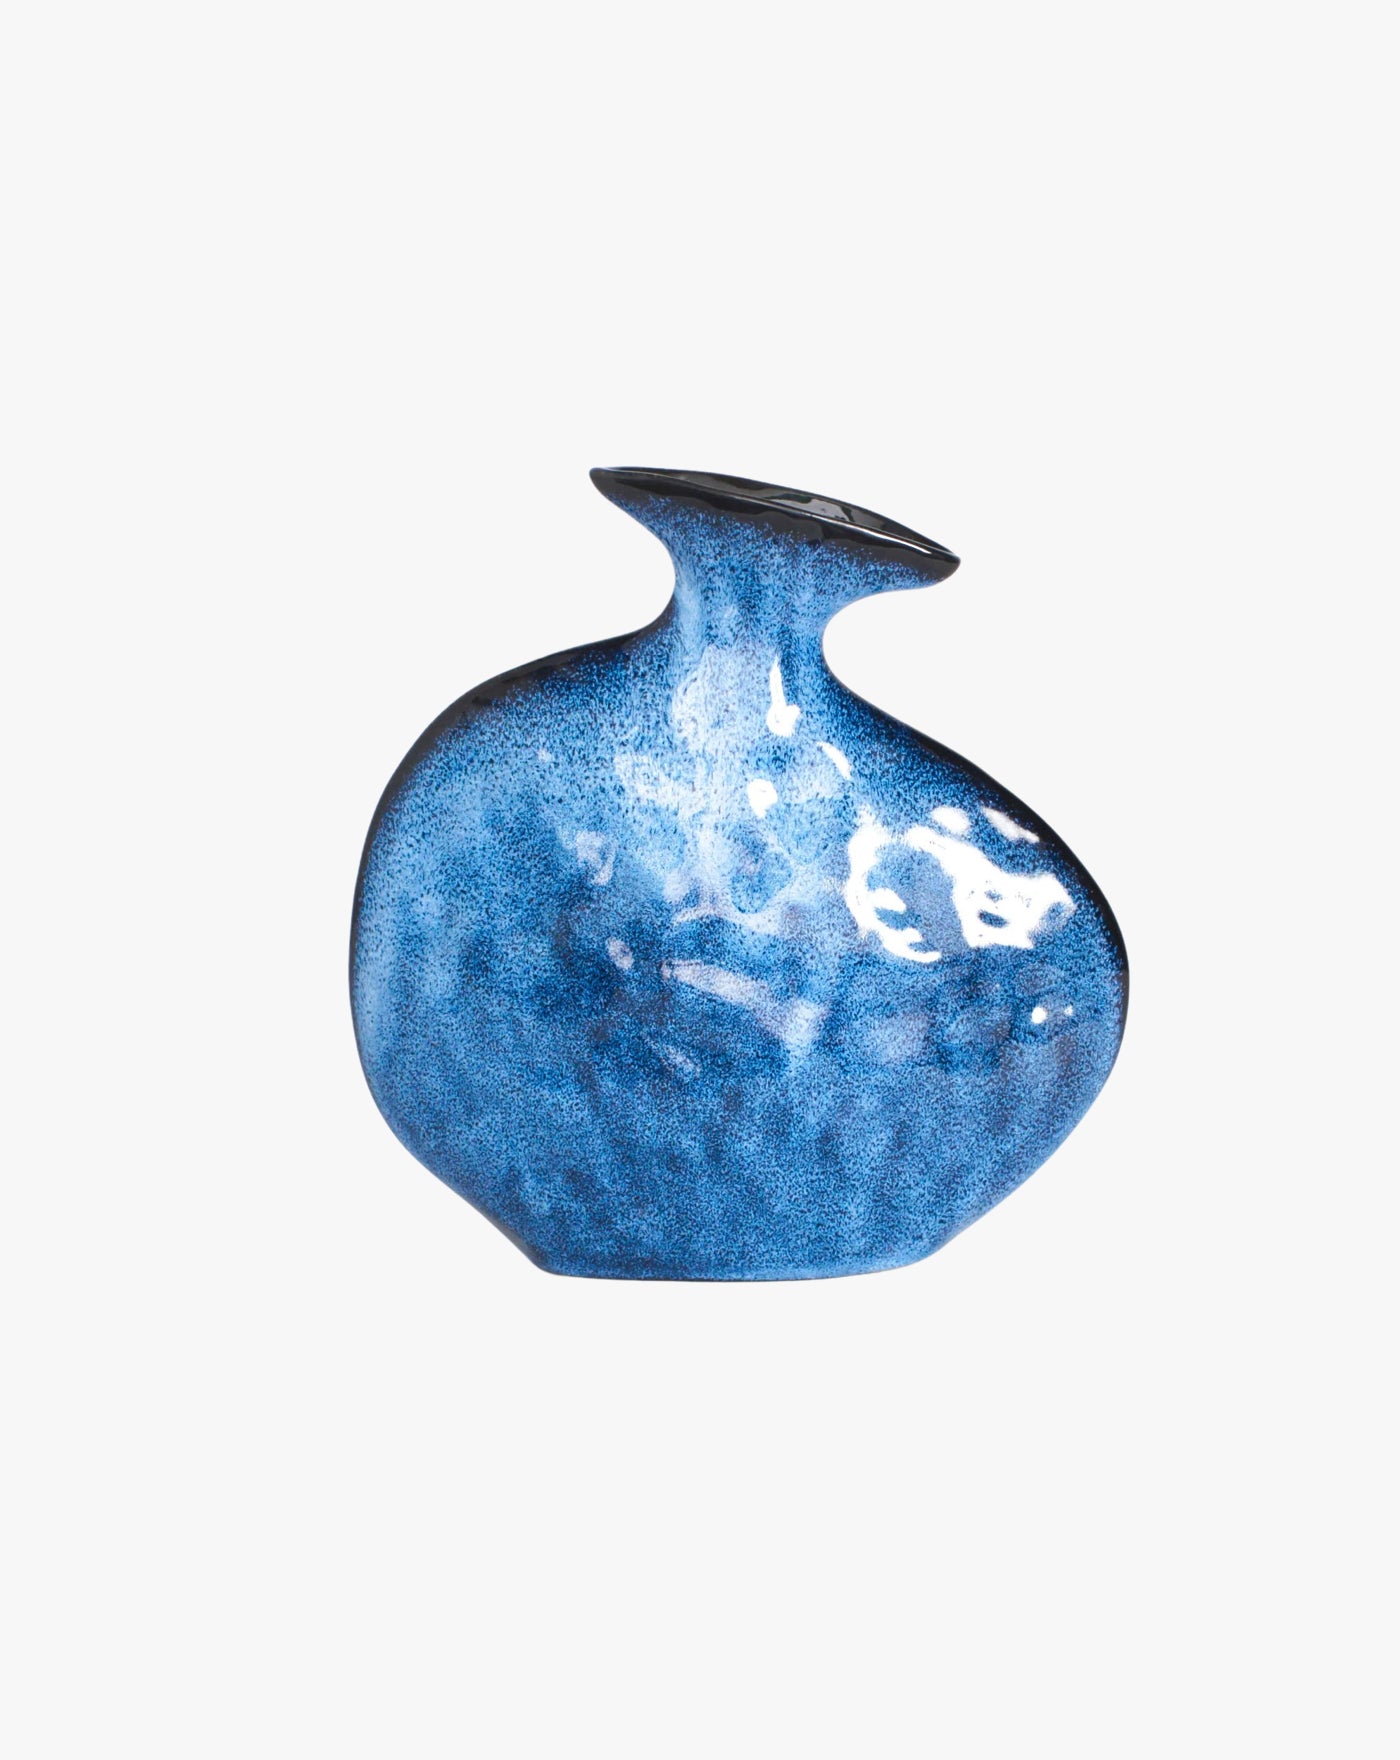 Vases Flat Vase in Midnight Blue Midnight Blue Project 213A